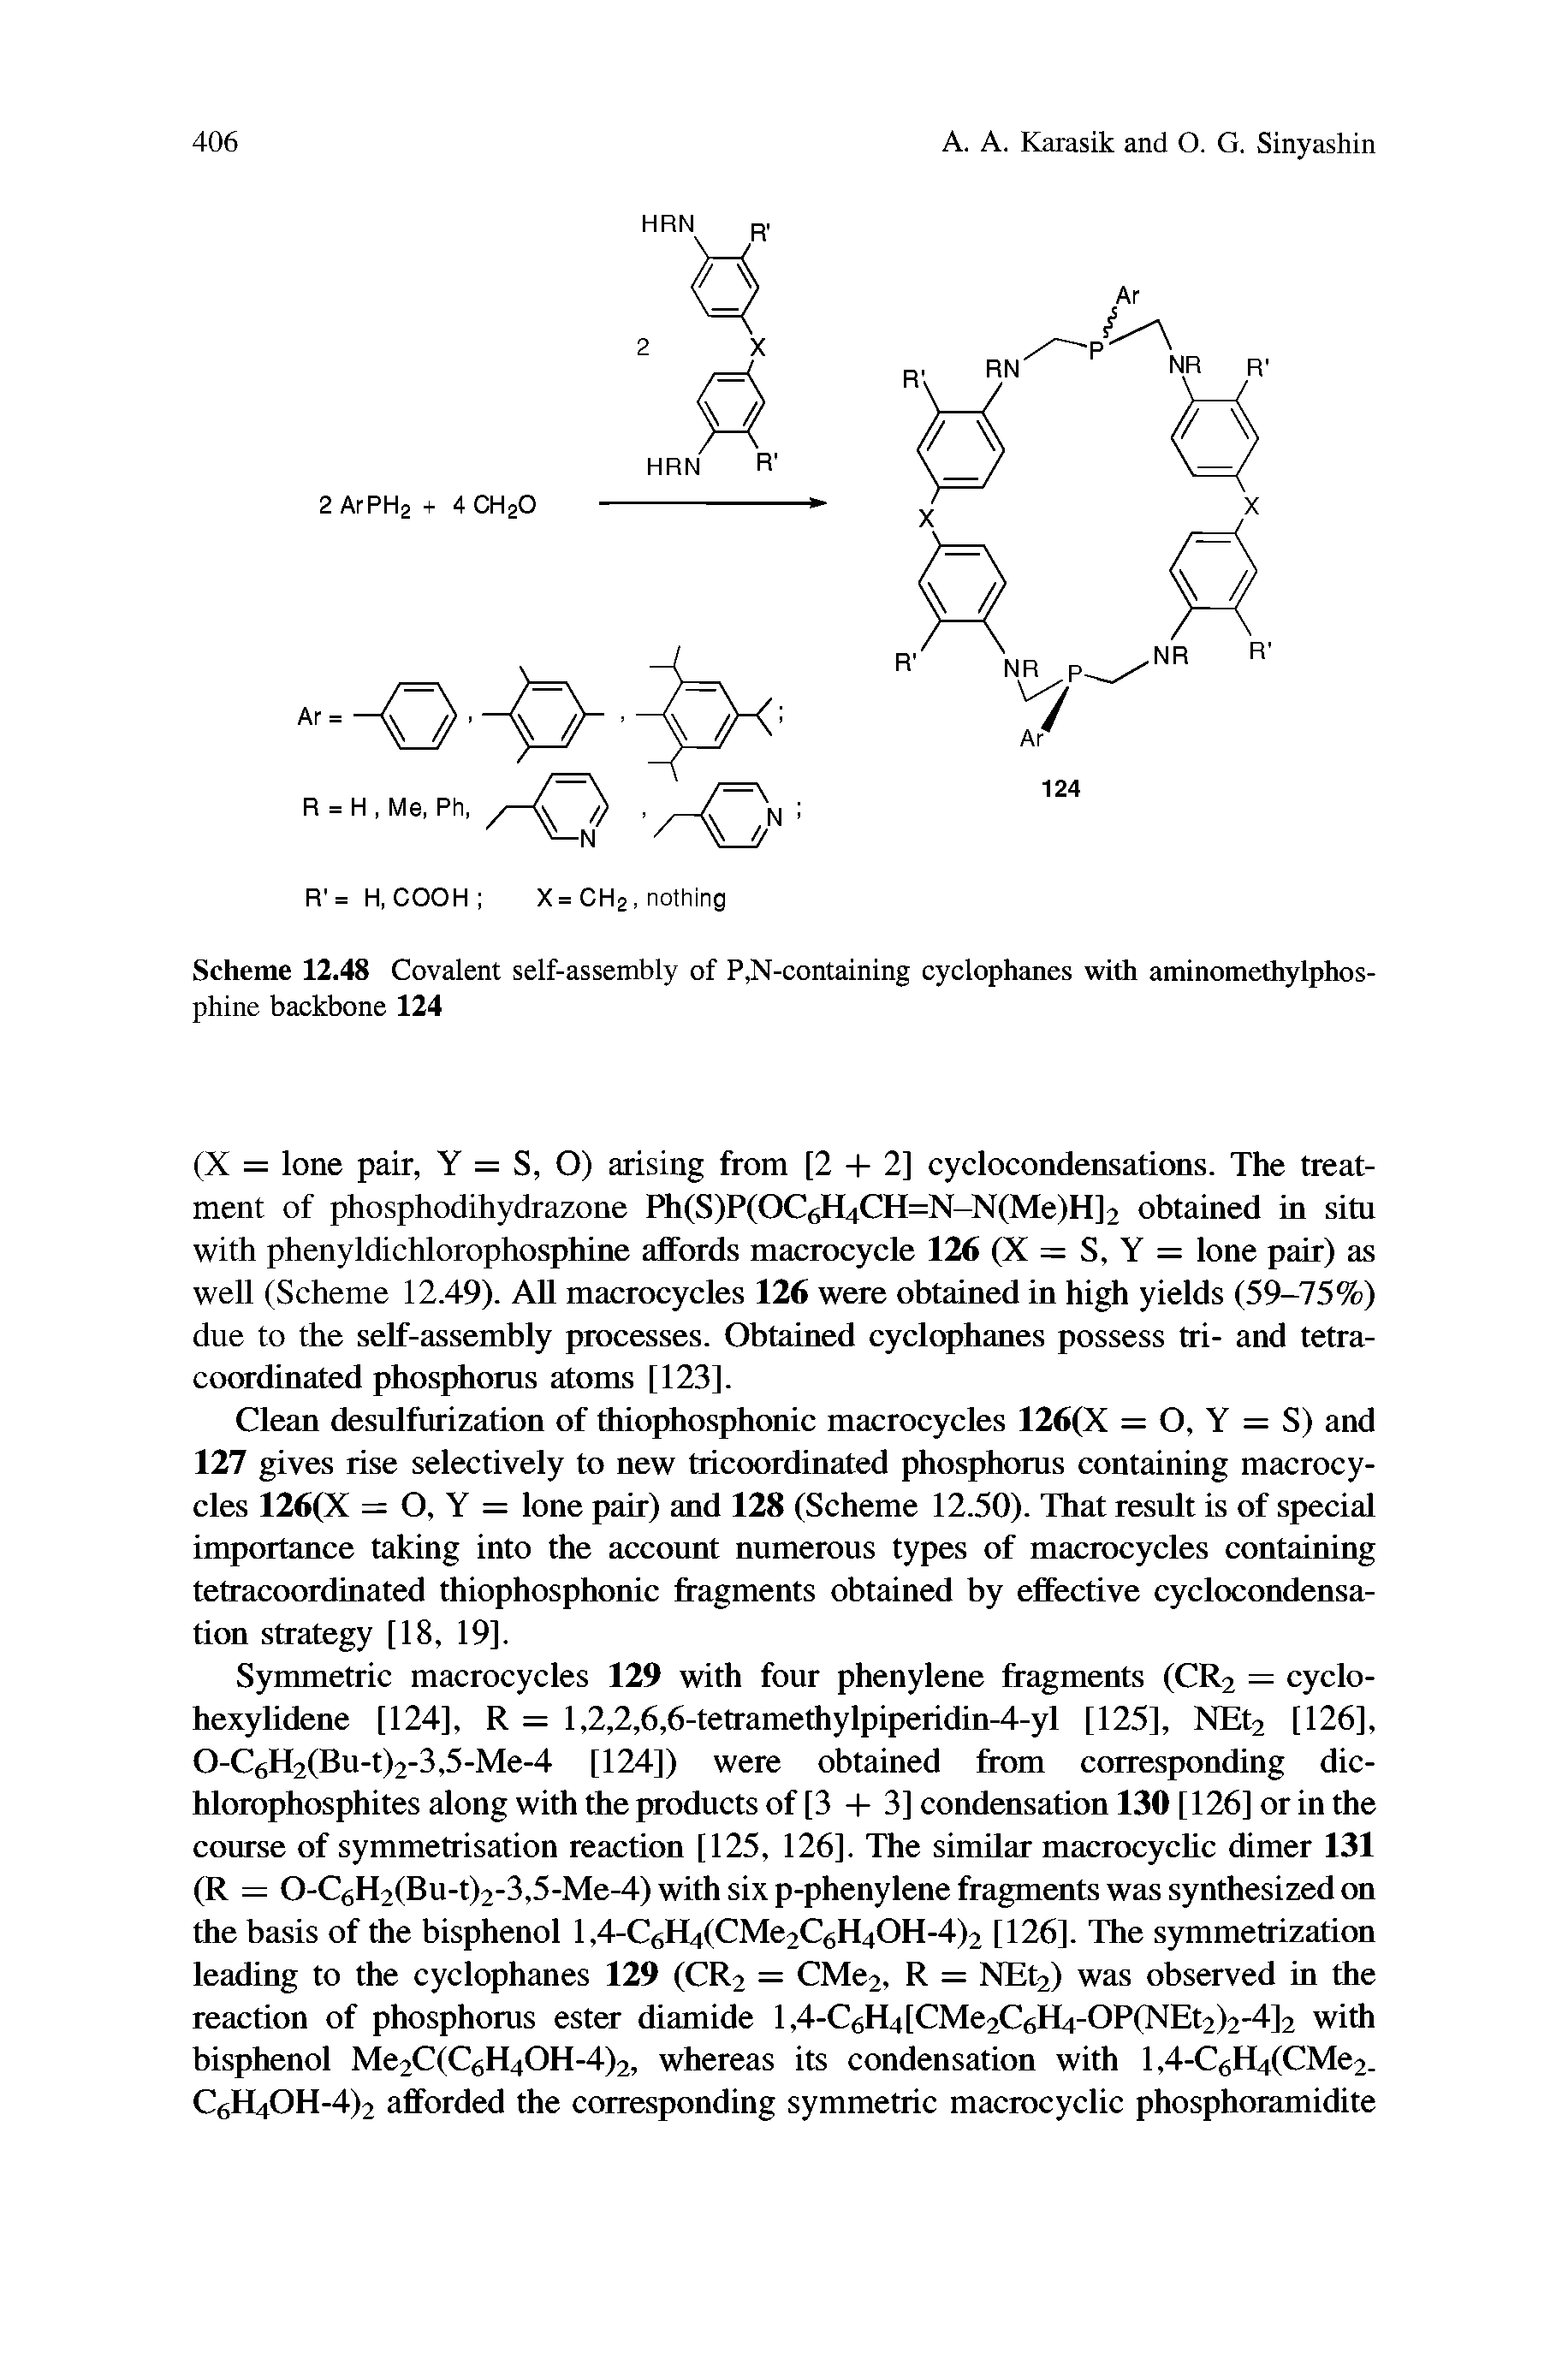 Scheme 12.48 Covalent self-assembly of P,N-containing cyclophanes with aminomethylphos-phine backbone 124...